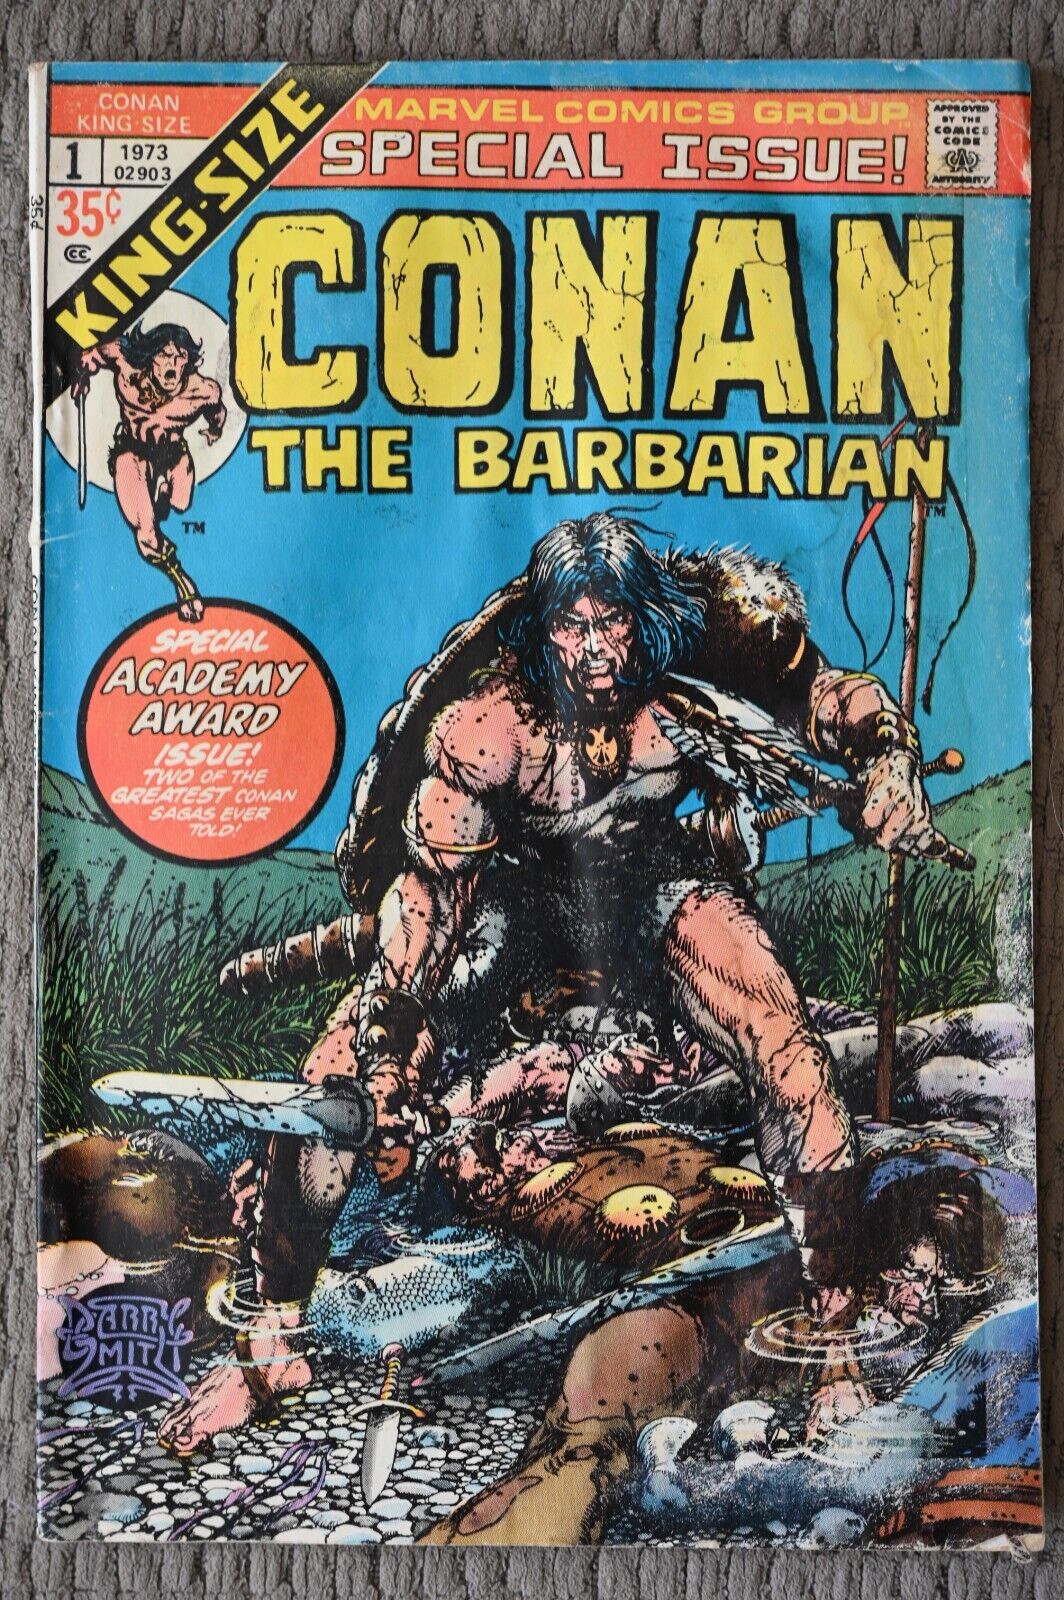 Conan the Barbarian King-Size Special Issue - Volume 1, Number 1, 1973